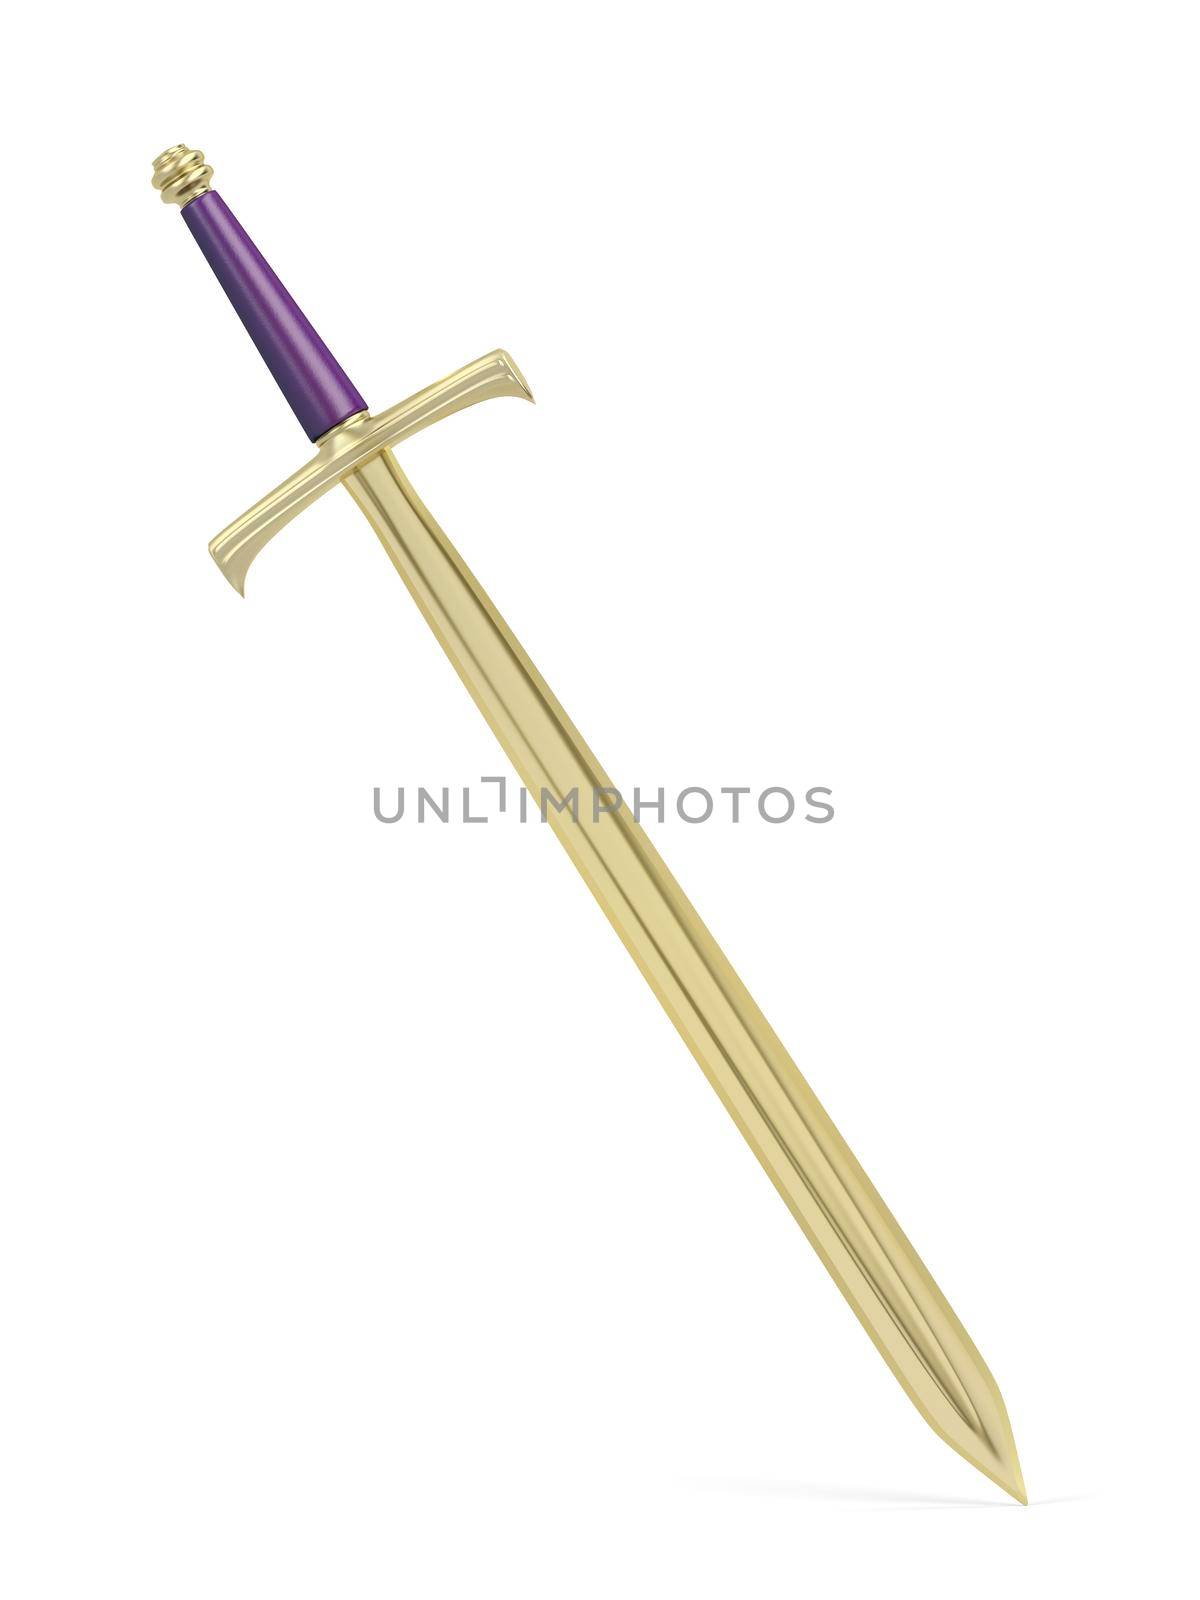 Golden sword with leather handle on white background